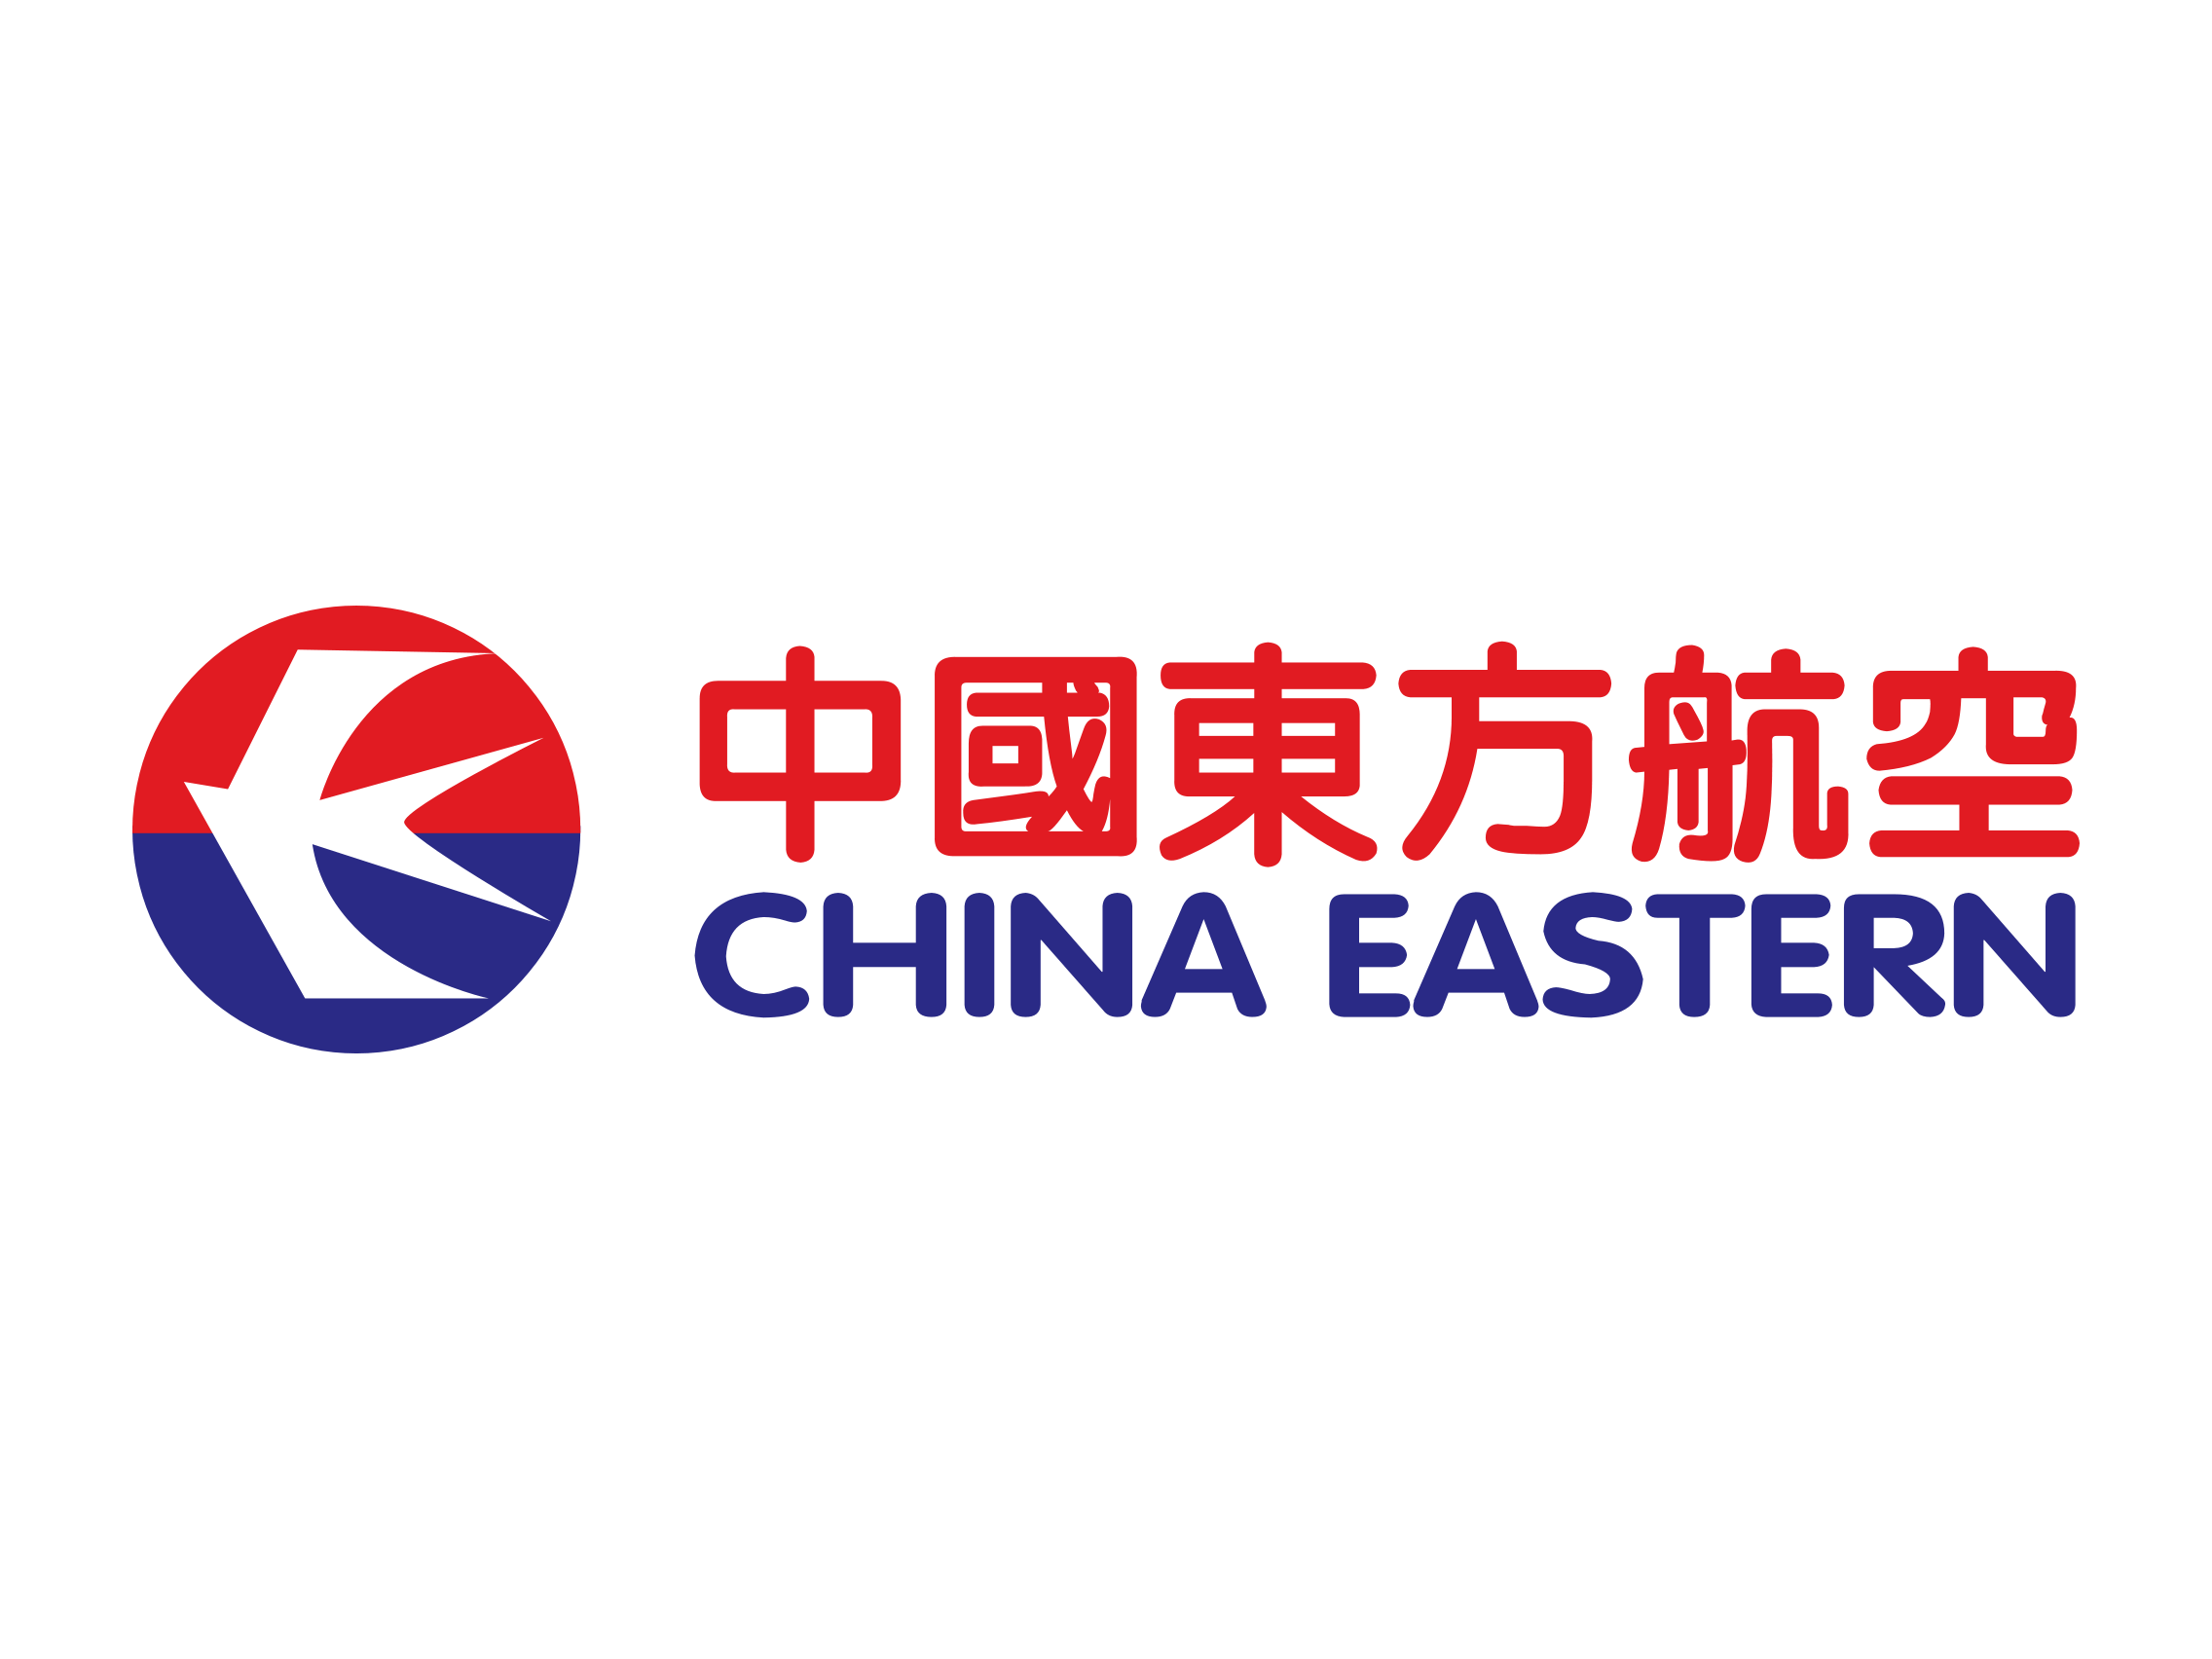 Chinese Blue and Red Logo - China Eastern logo